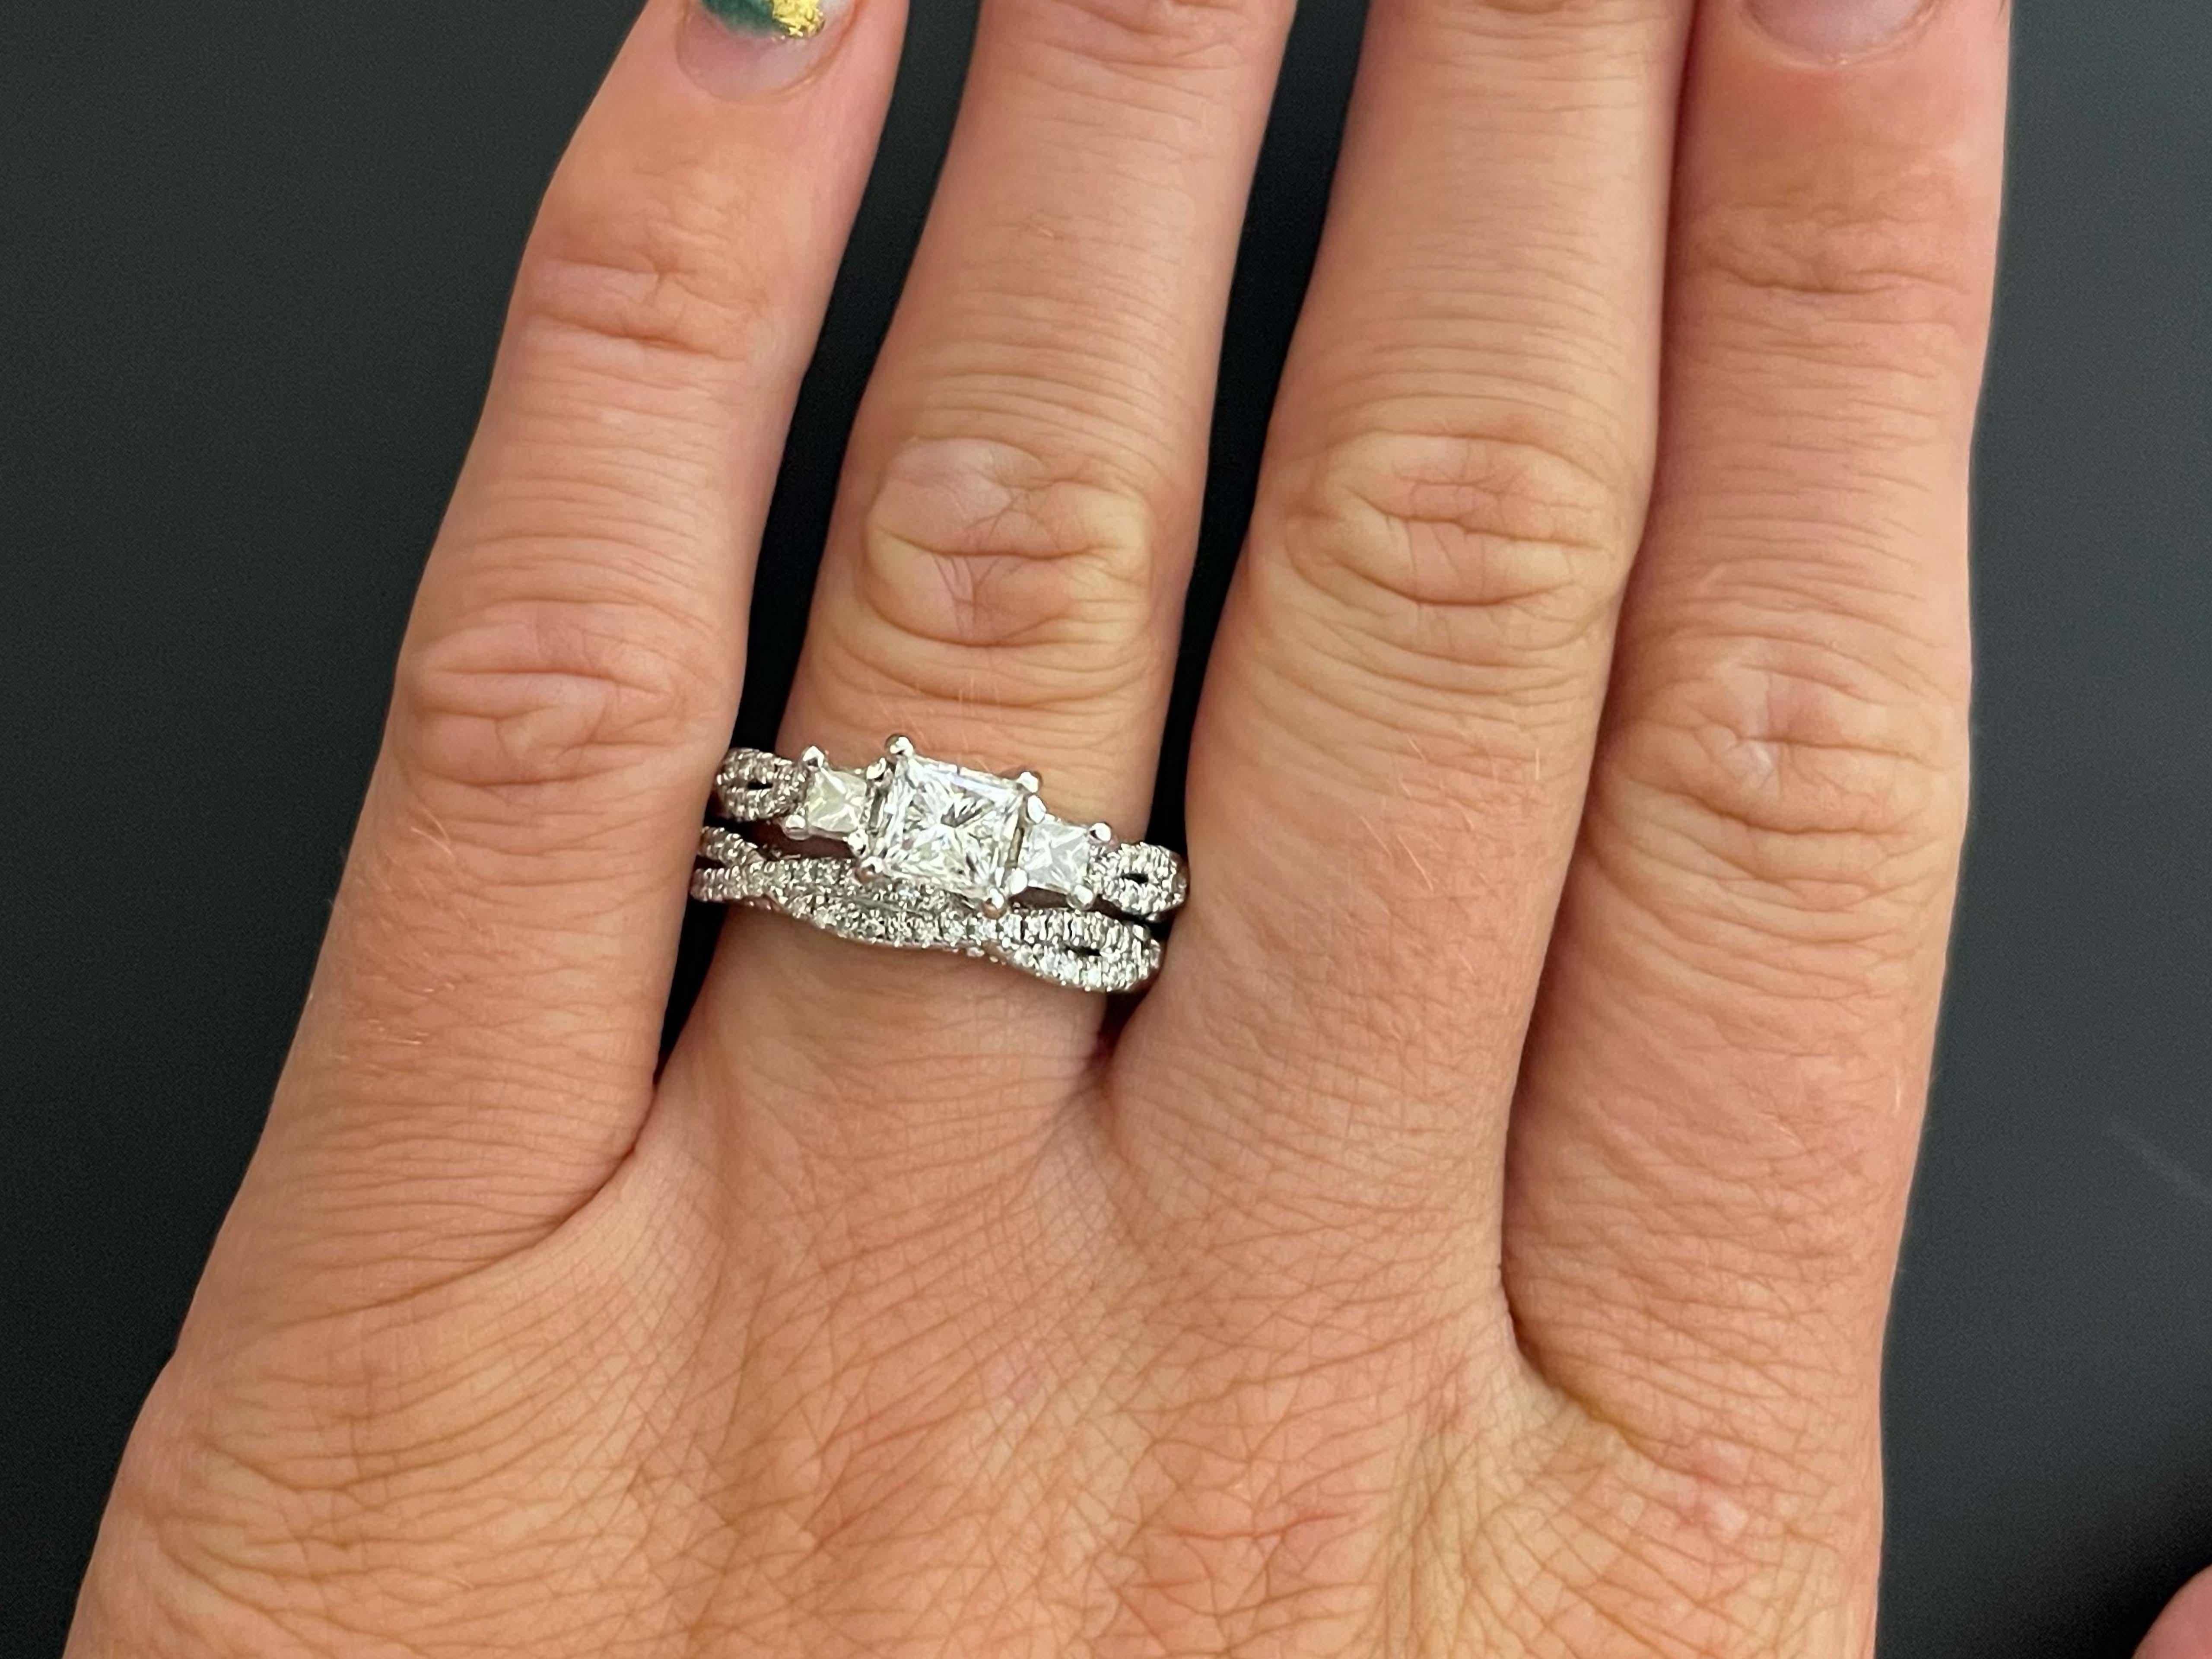 Verragio Princess Cut Diamond Engagement Ring Set in 14K White Gold. The center stone is a princess cut 1.00 carat G, SI1 and comes with GIA diamond report #:6177456490. The ring is a timeless representation of a three stone diamond engagement ring